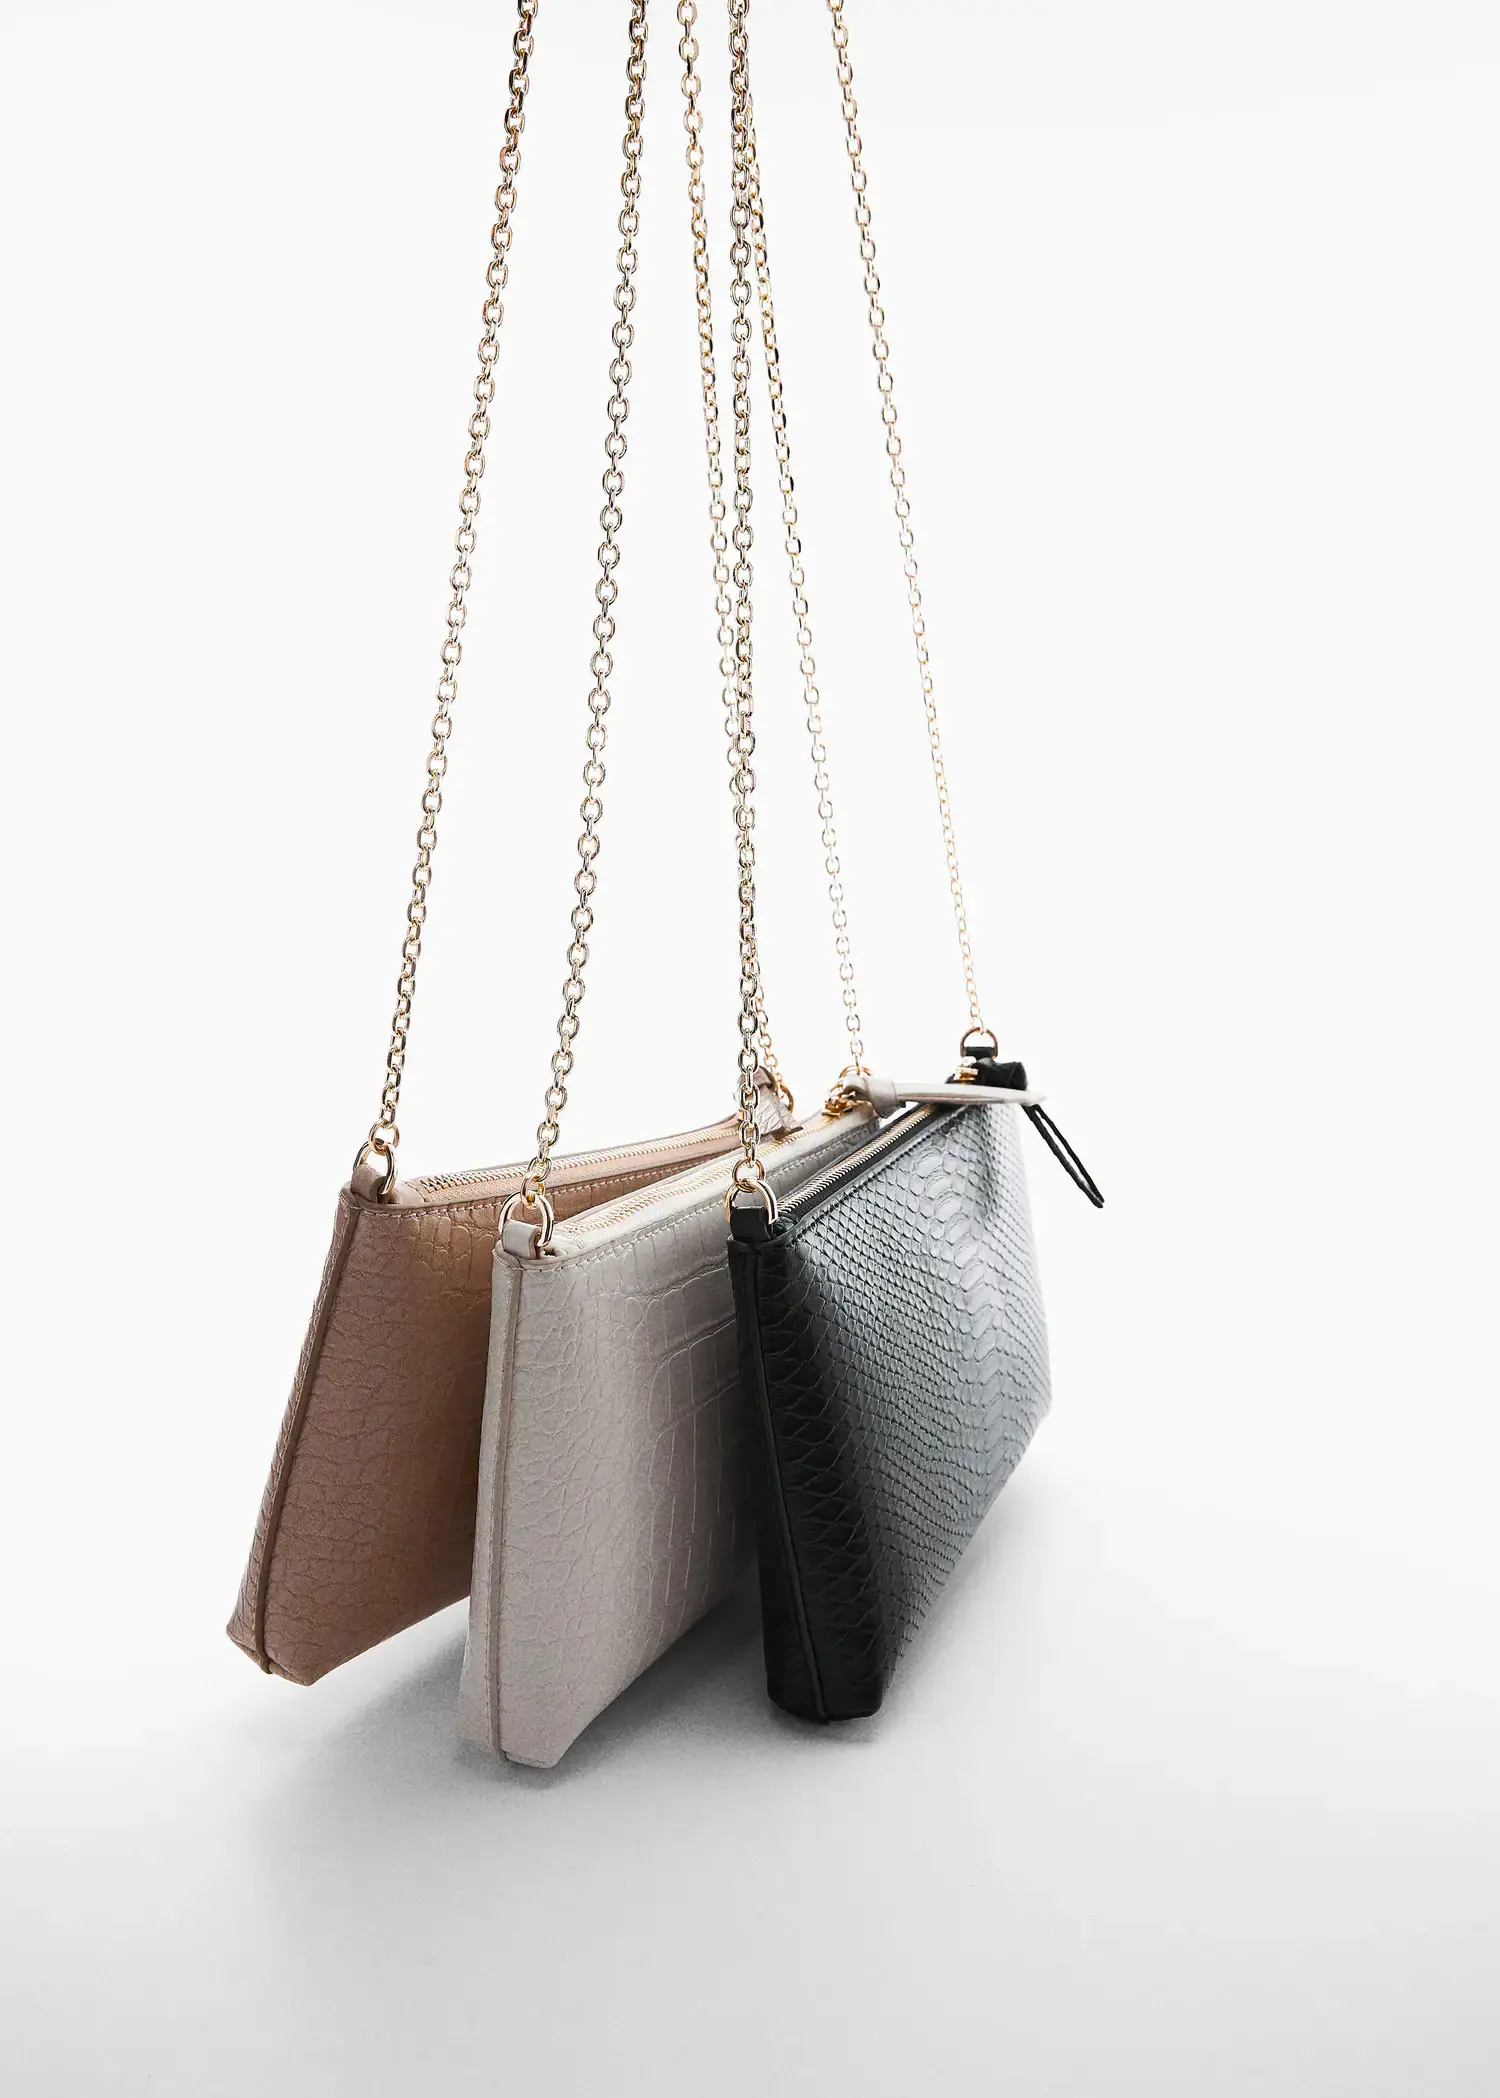 Mango Coco chain bag. a couple of clutches hanging on a chain. 